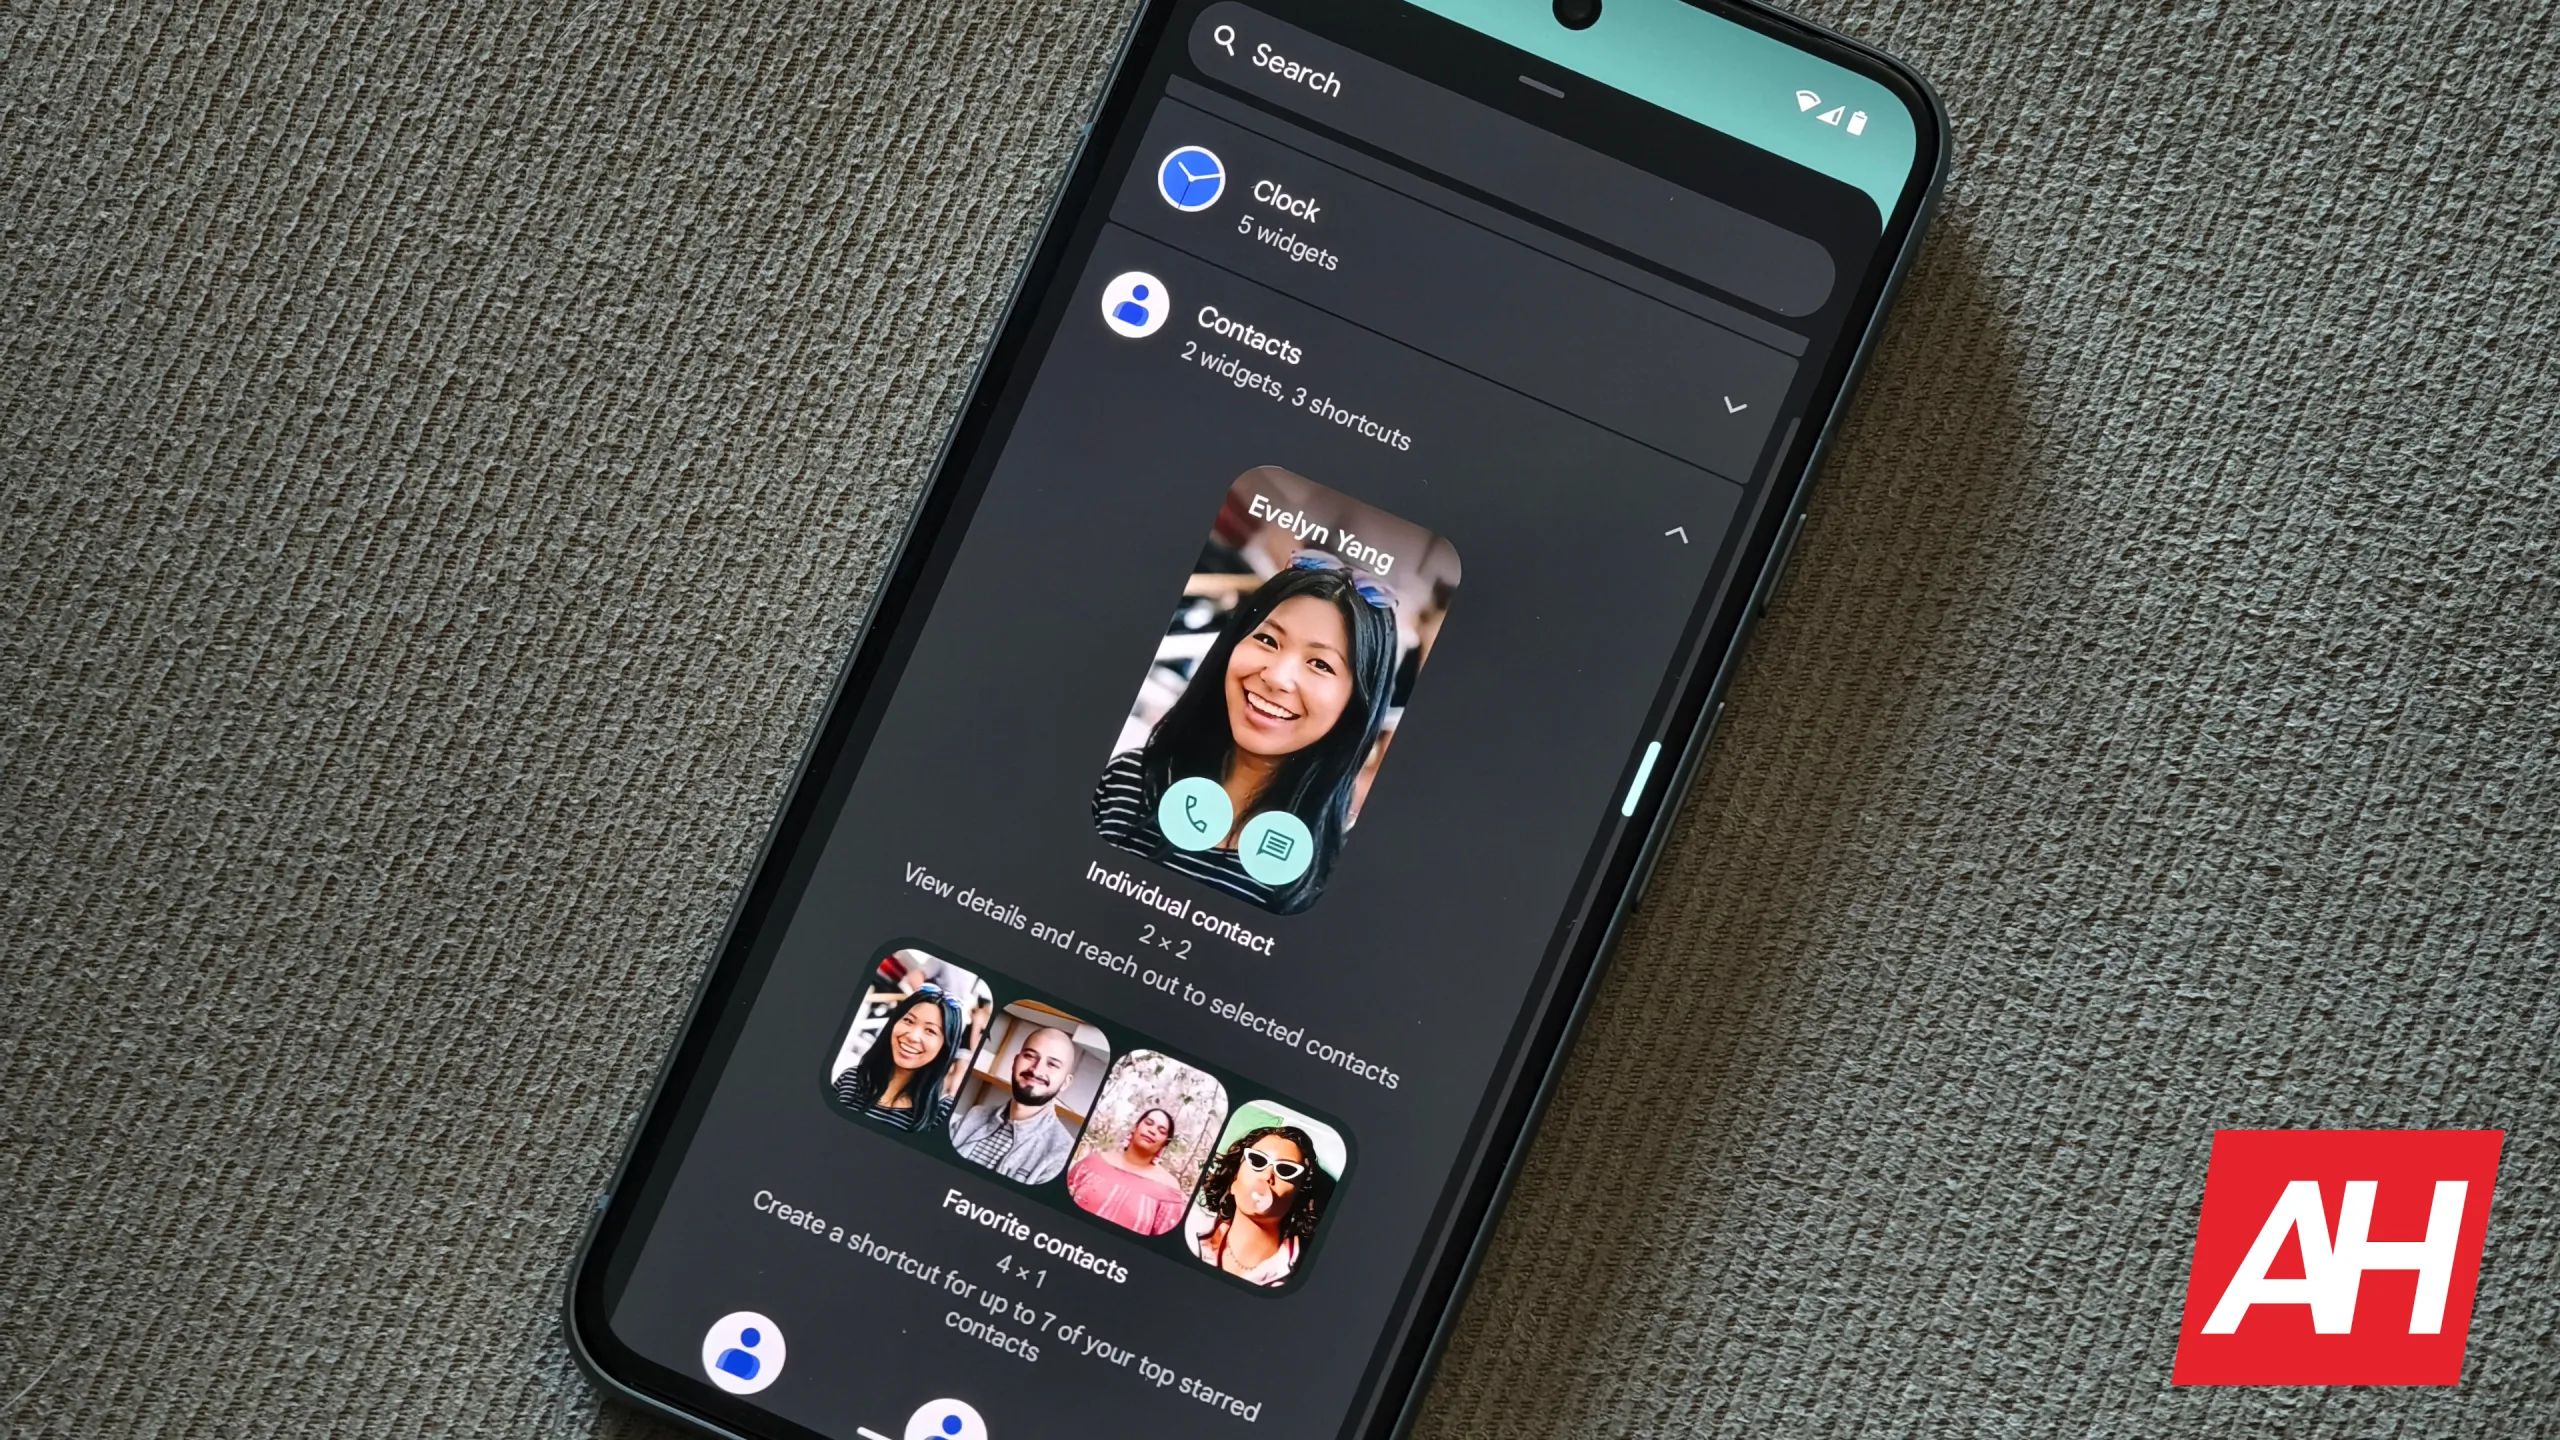 This Google Contacts widget now supports notification alerts